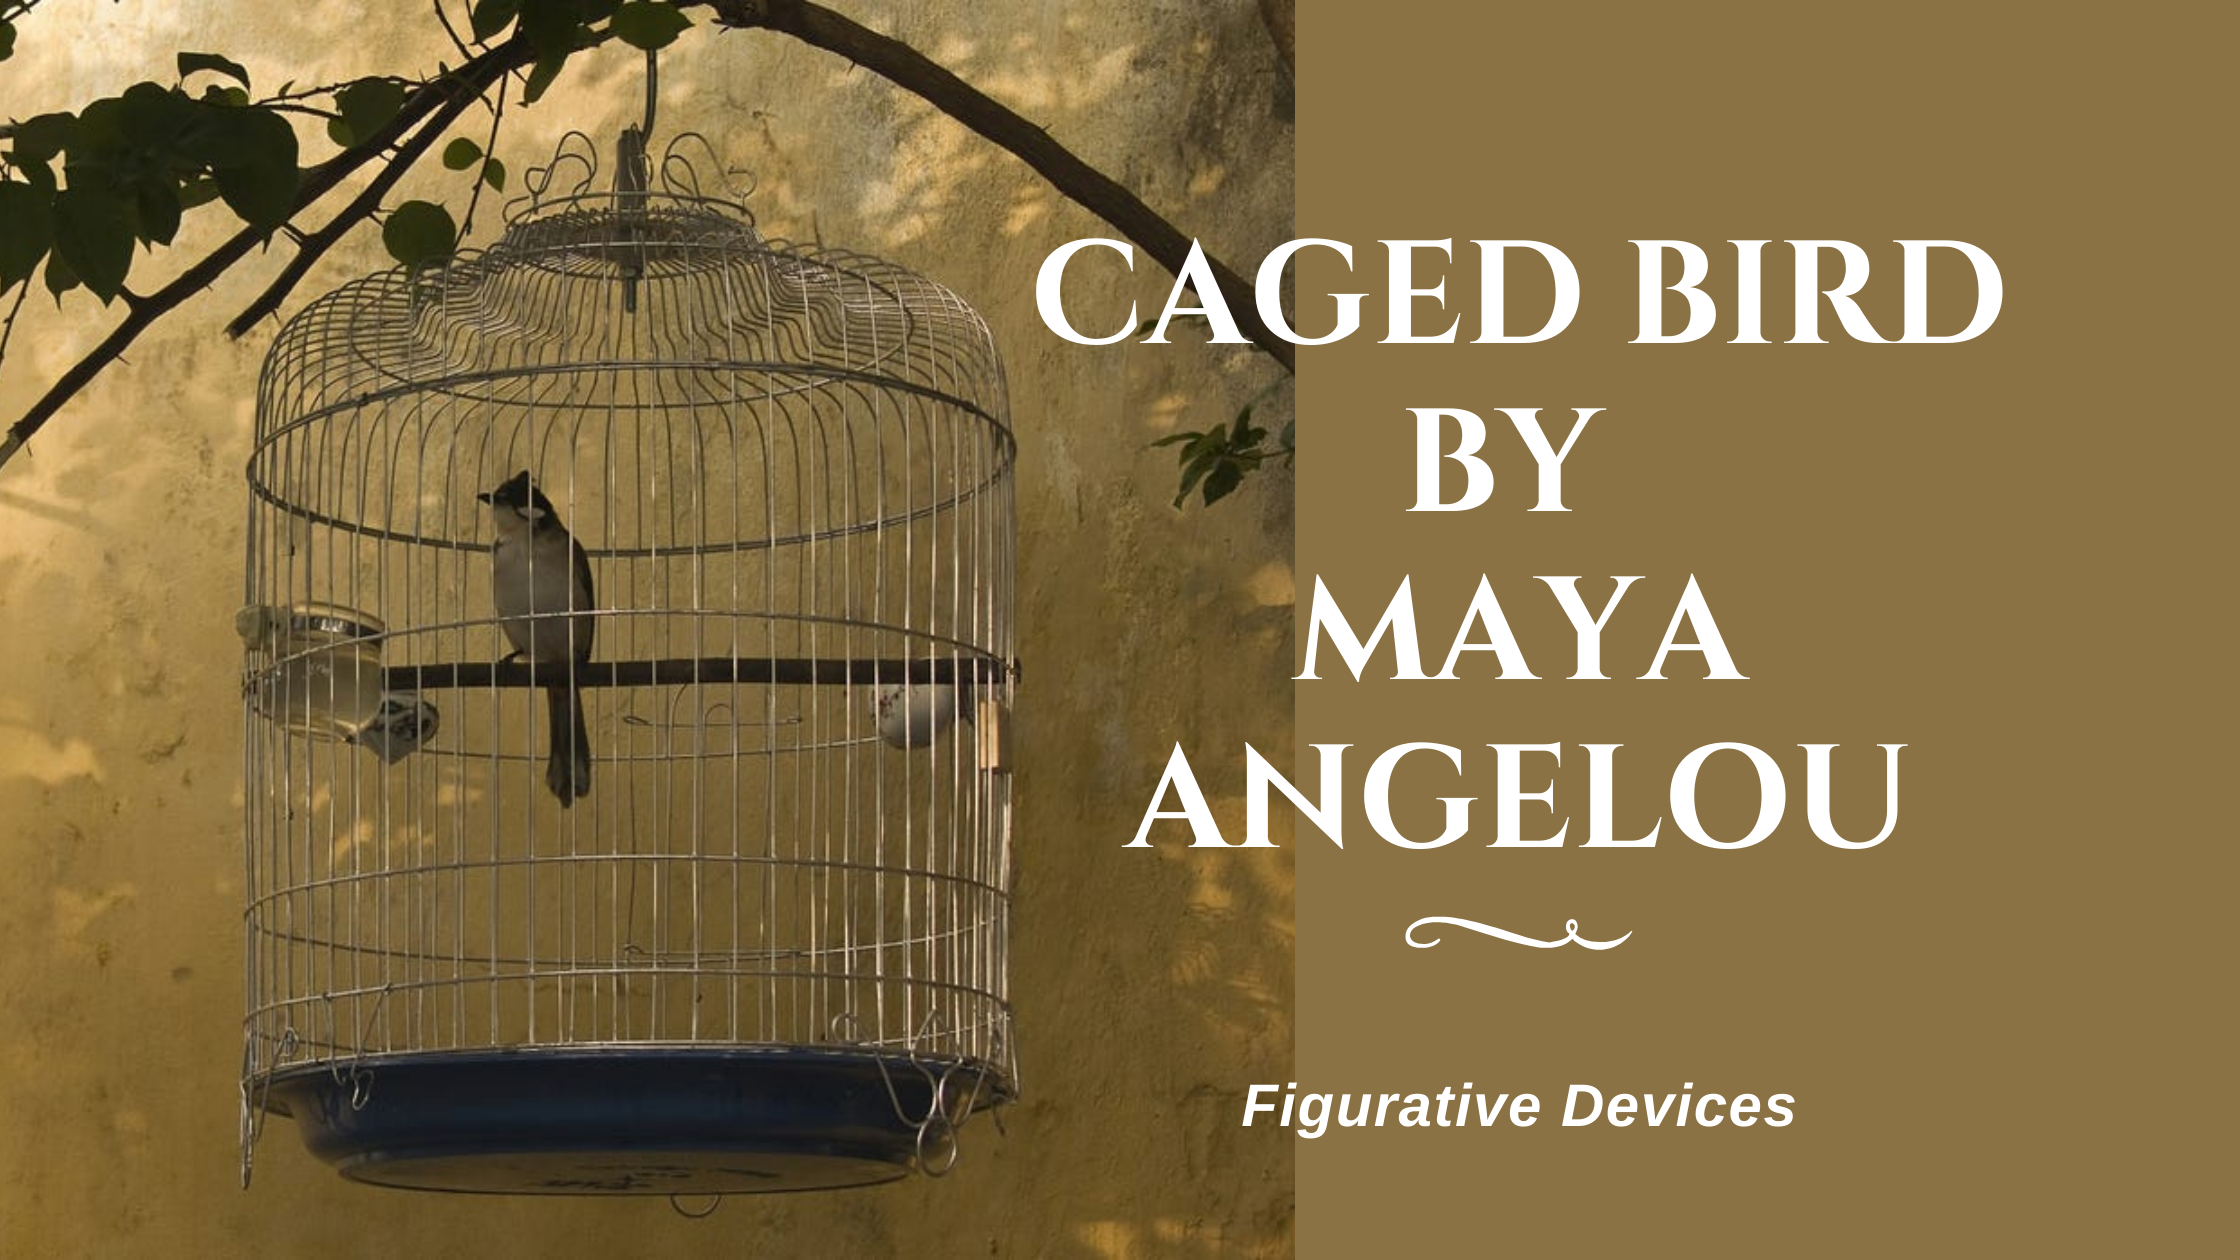 Caged Bird Figurative Devices by Maya Angelou